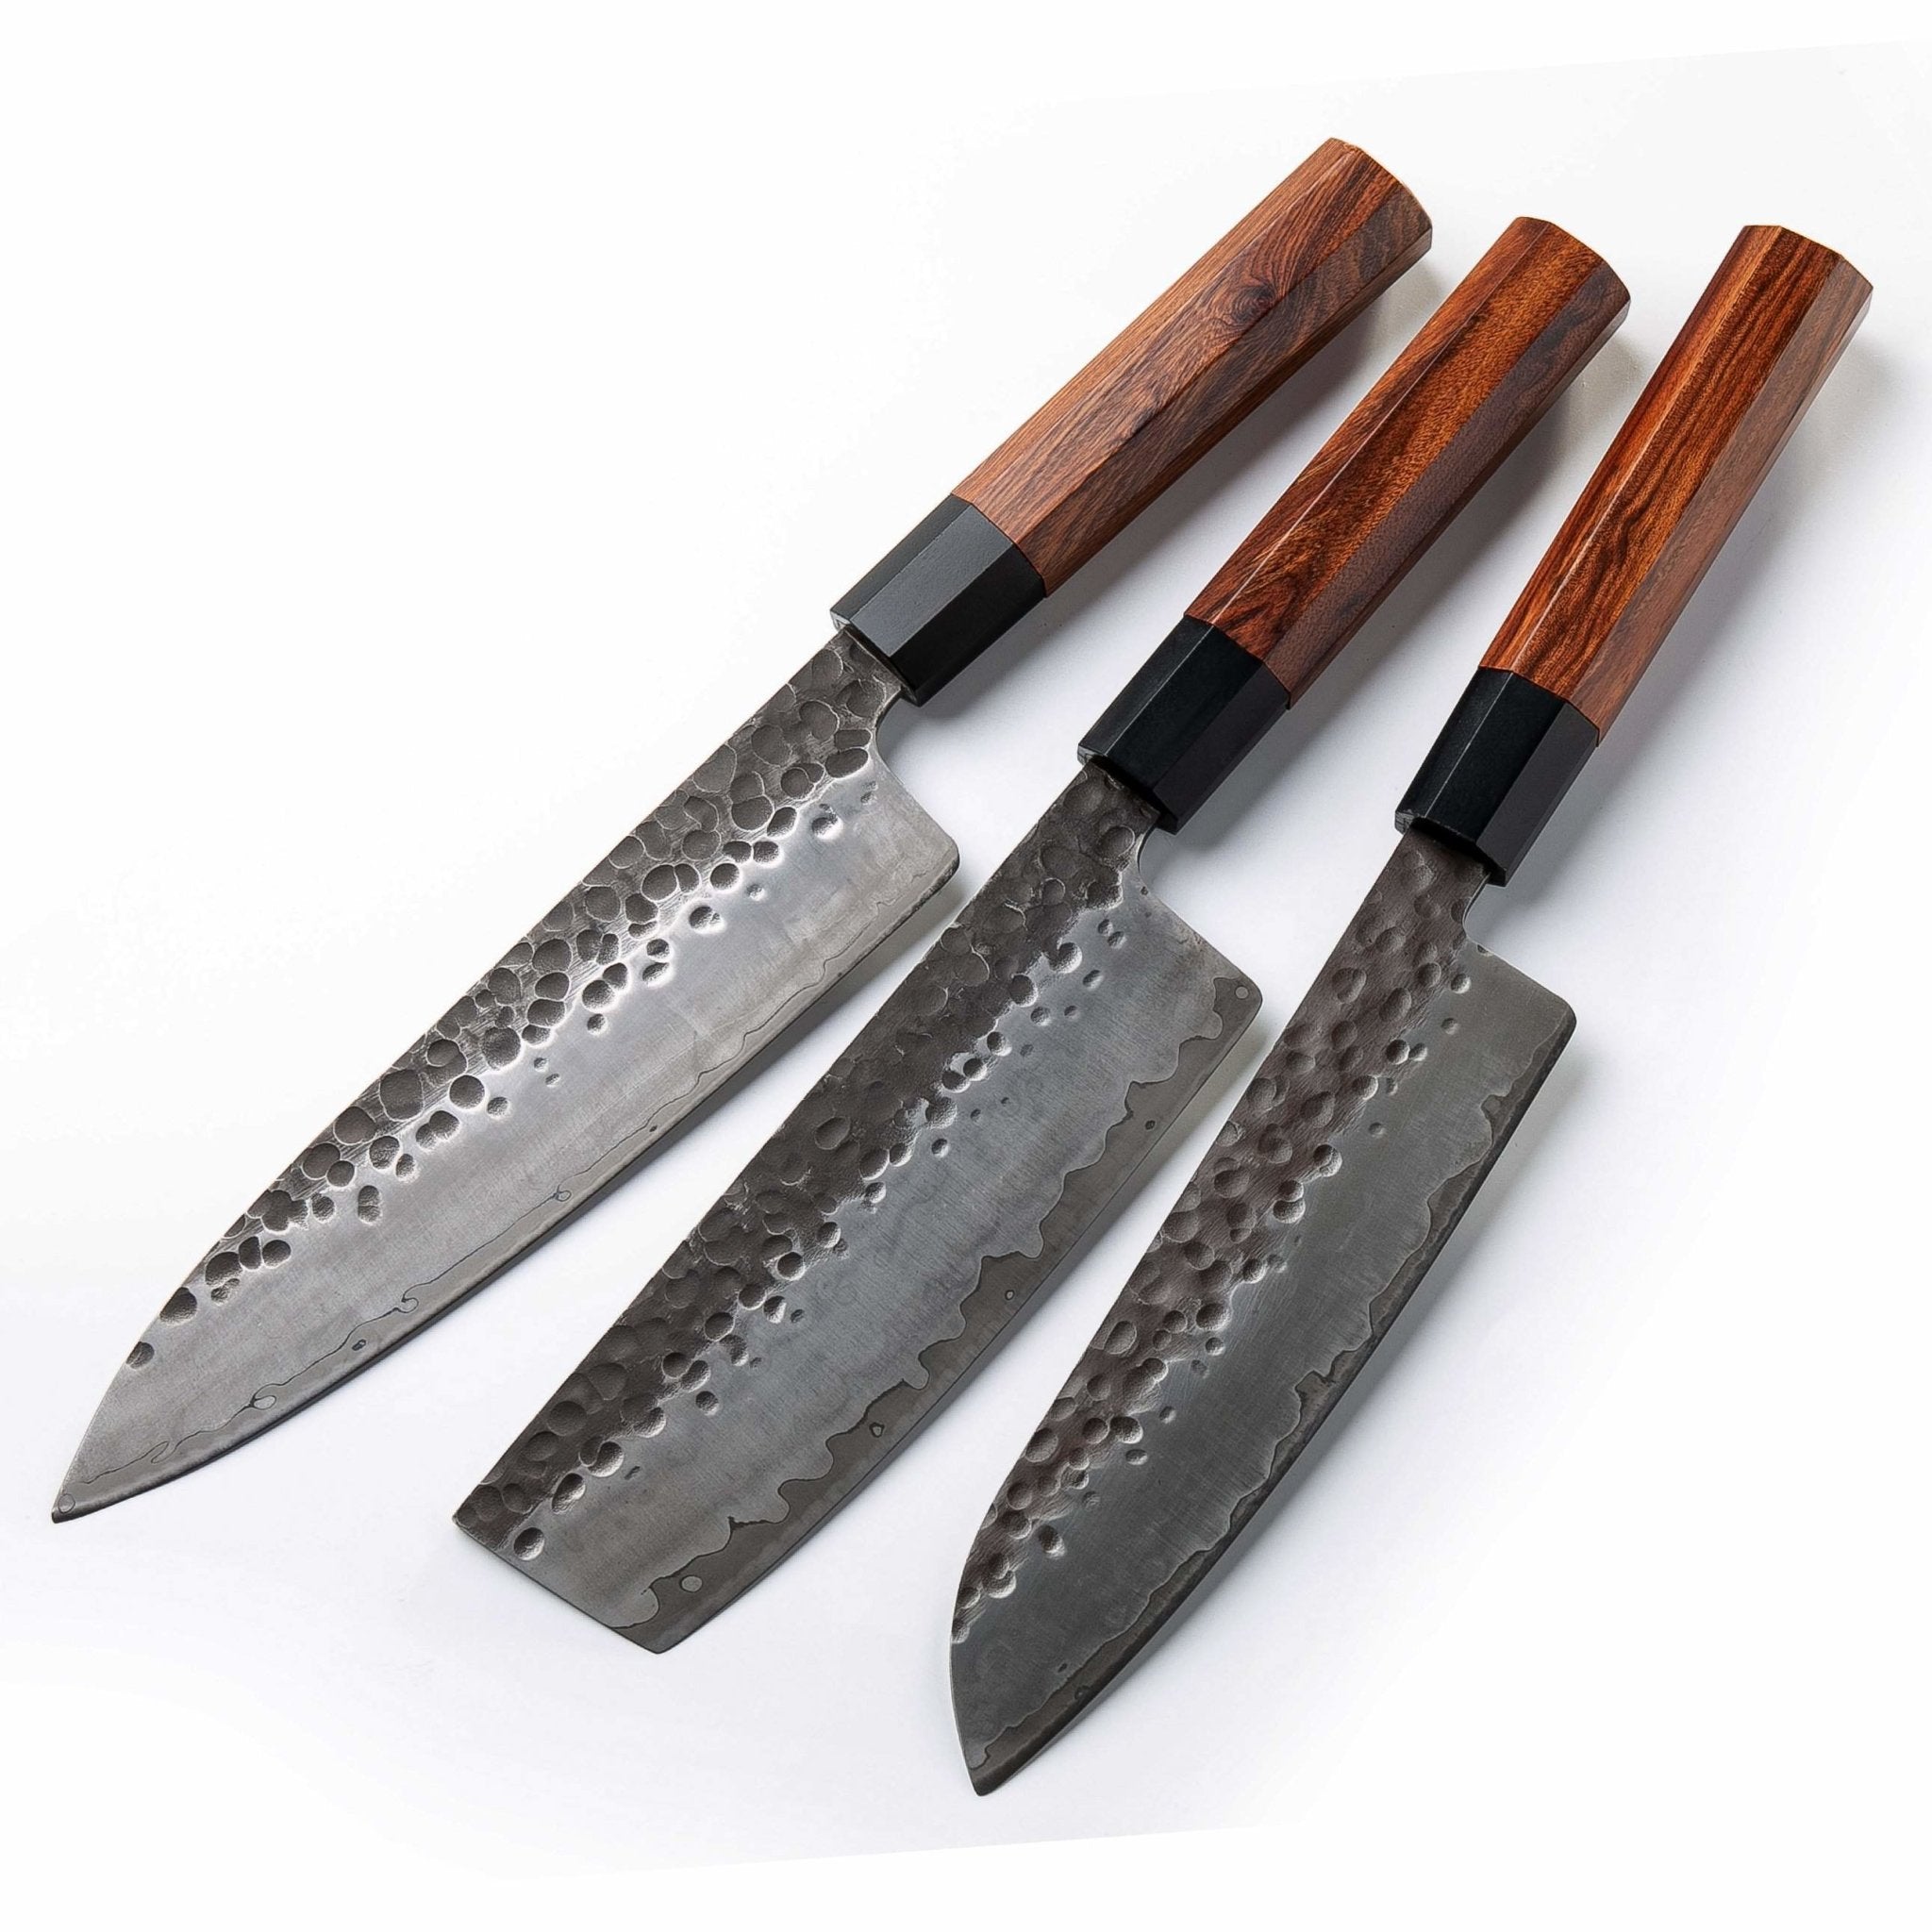 Damascus Pattern Stainless Steel Kitchen Knife Set - Special Vegetable,  Meat, And Bone Knives For Chefs Commercial Kitchen Supplies